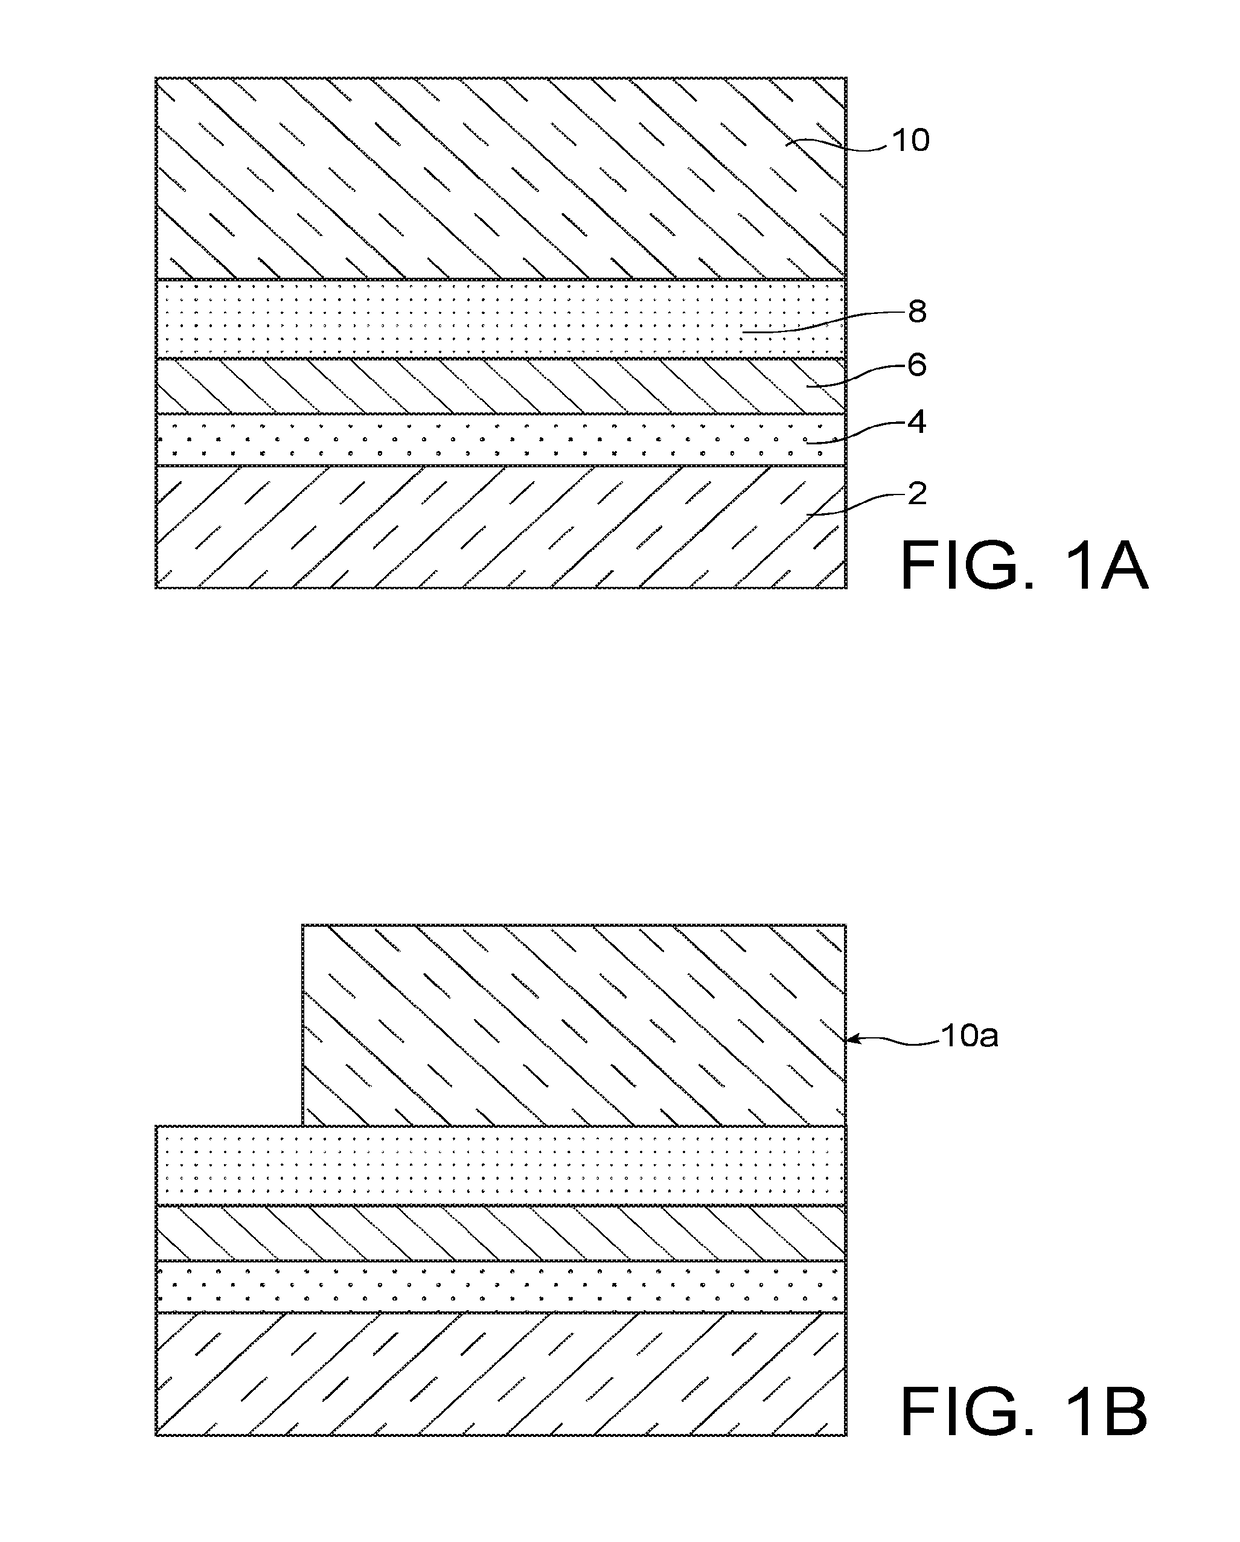 Fabrication of a transistor with a channel structure and semimetal source and drain regions